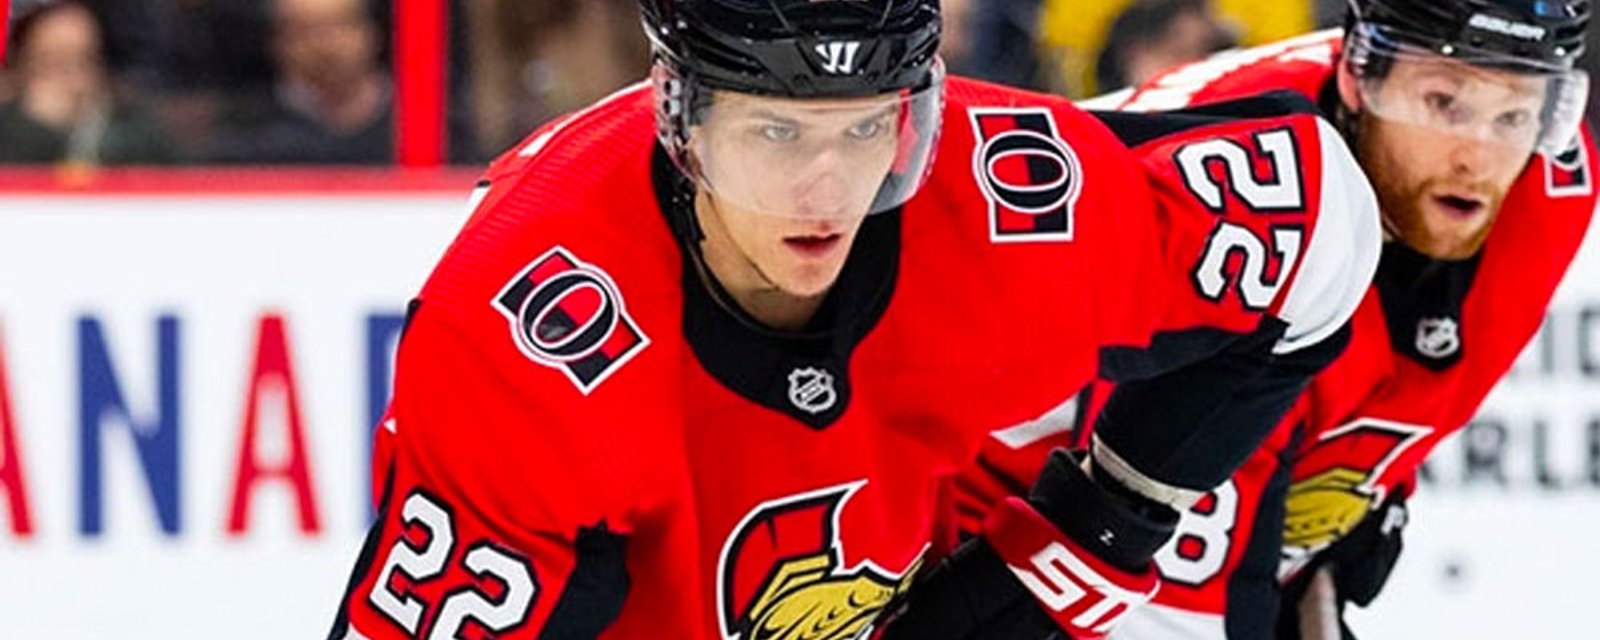 Report out of Russia leaks which Sens player tested positive with coronavirus! 